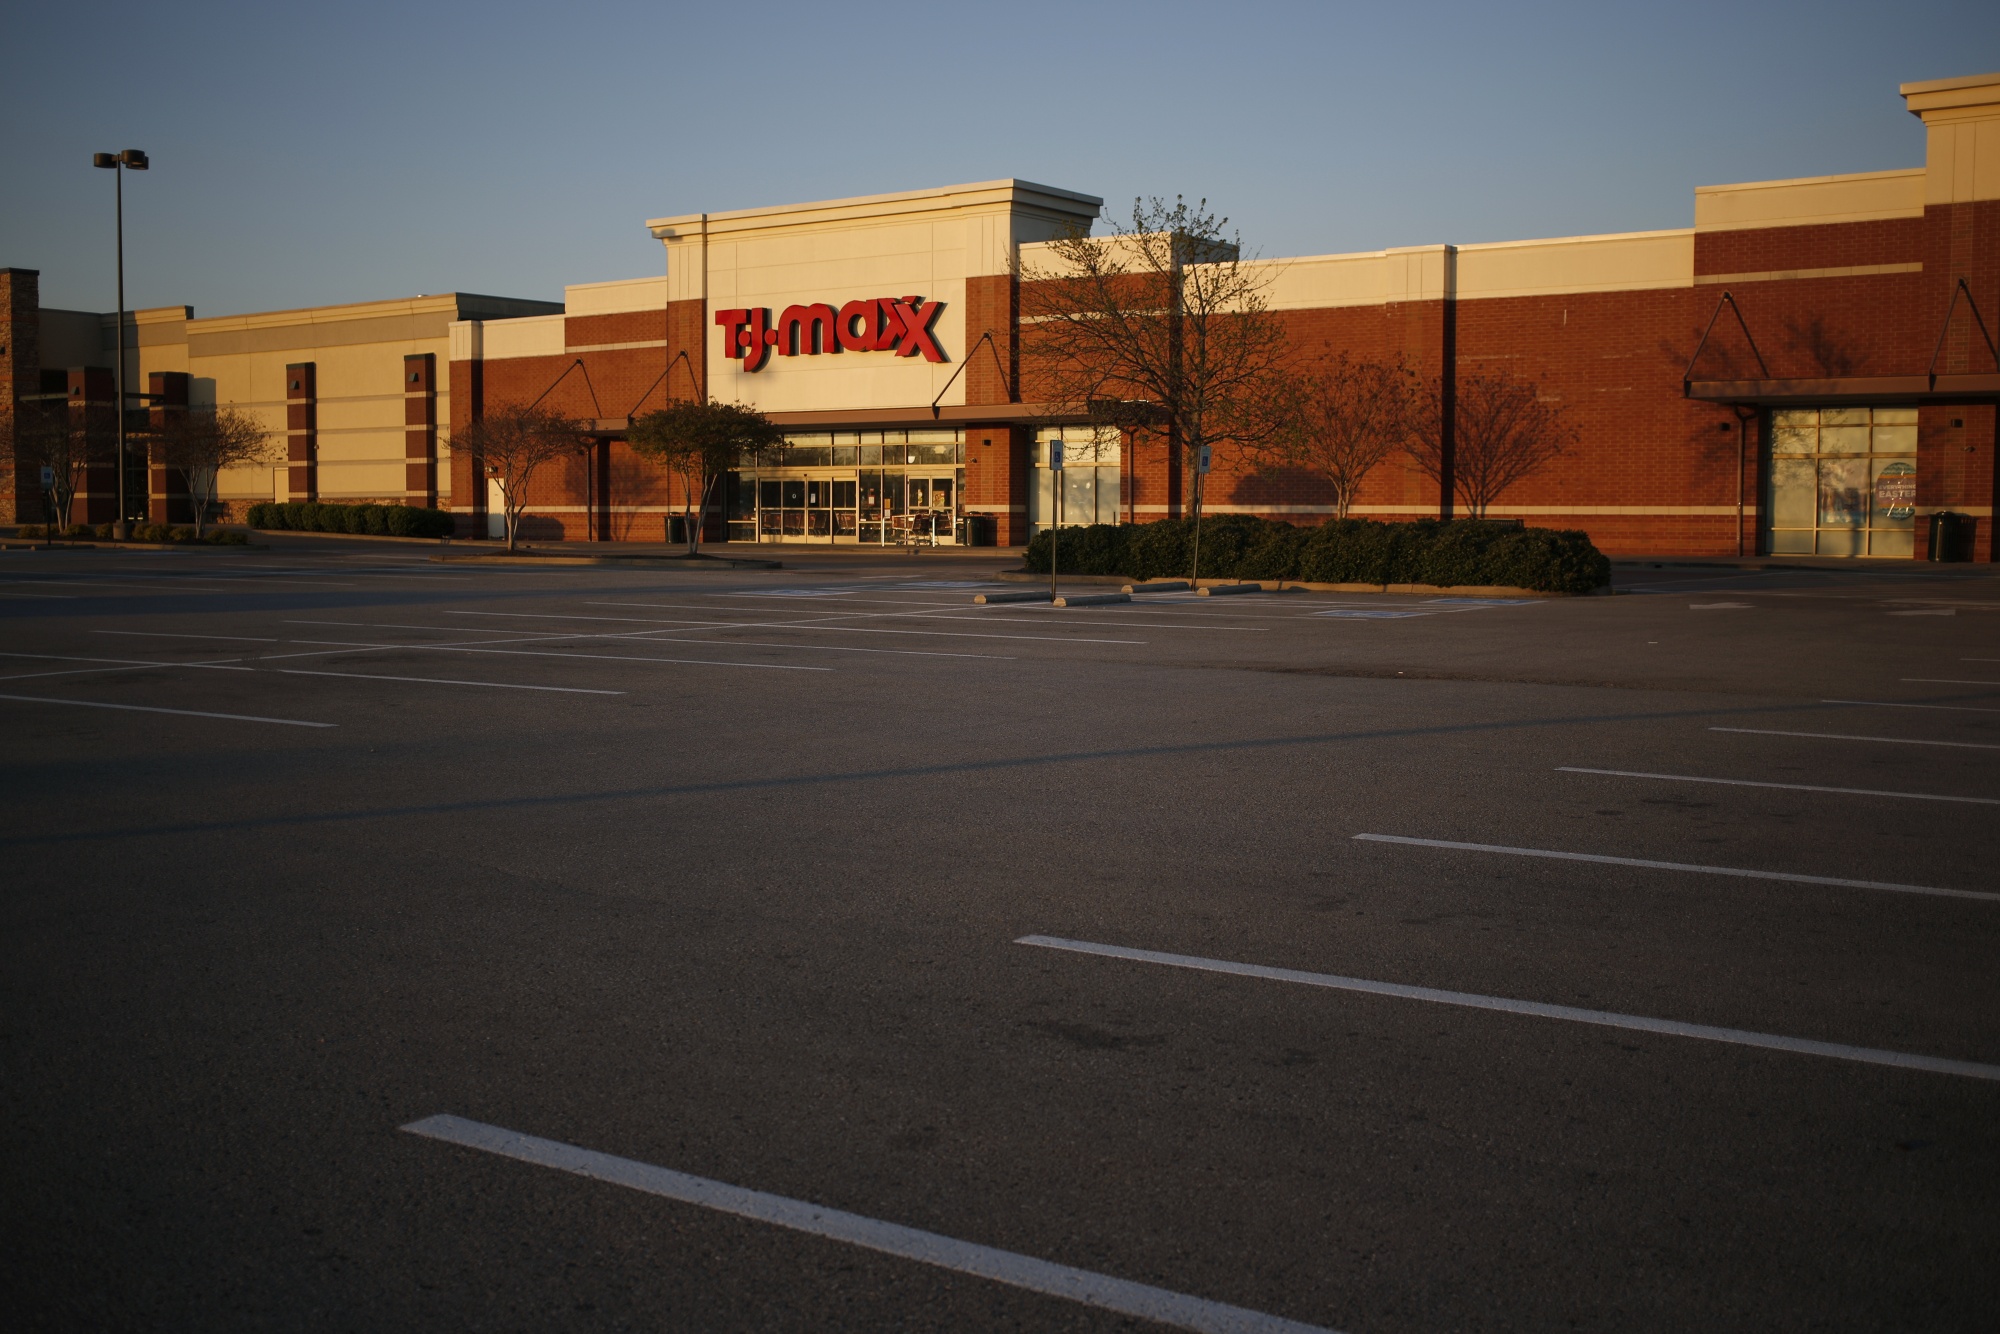 TJX Says It Doesn't Need More E-Commerce. Why It's Wrong